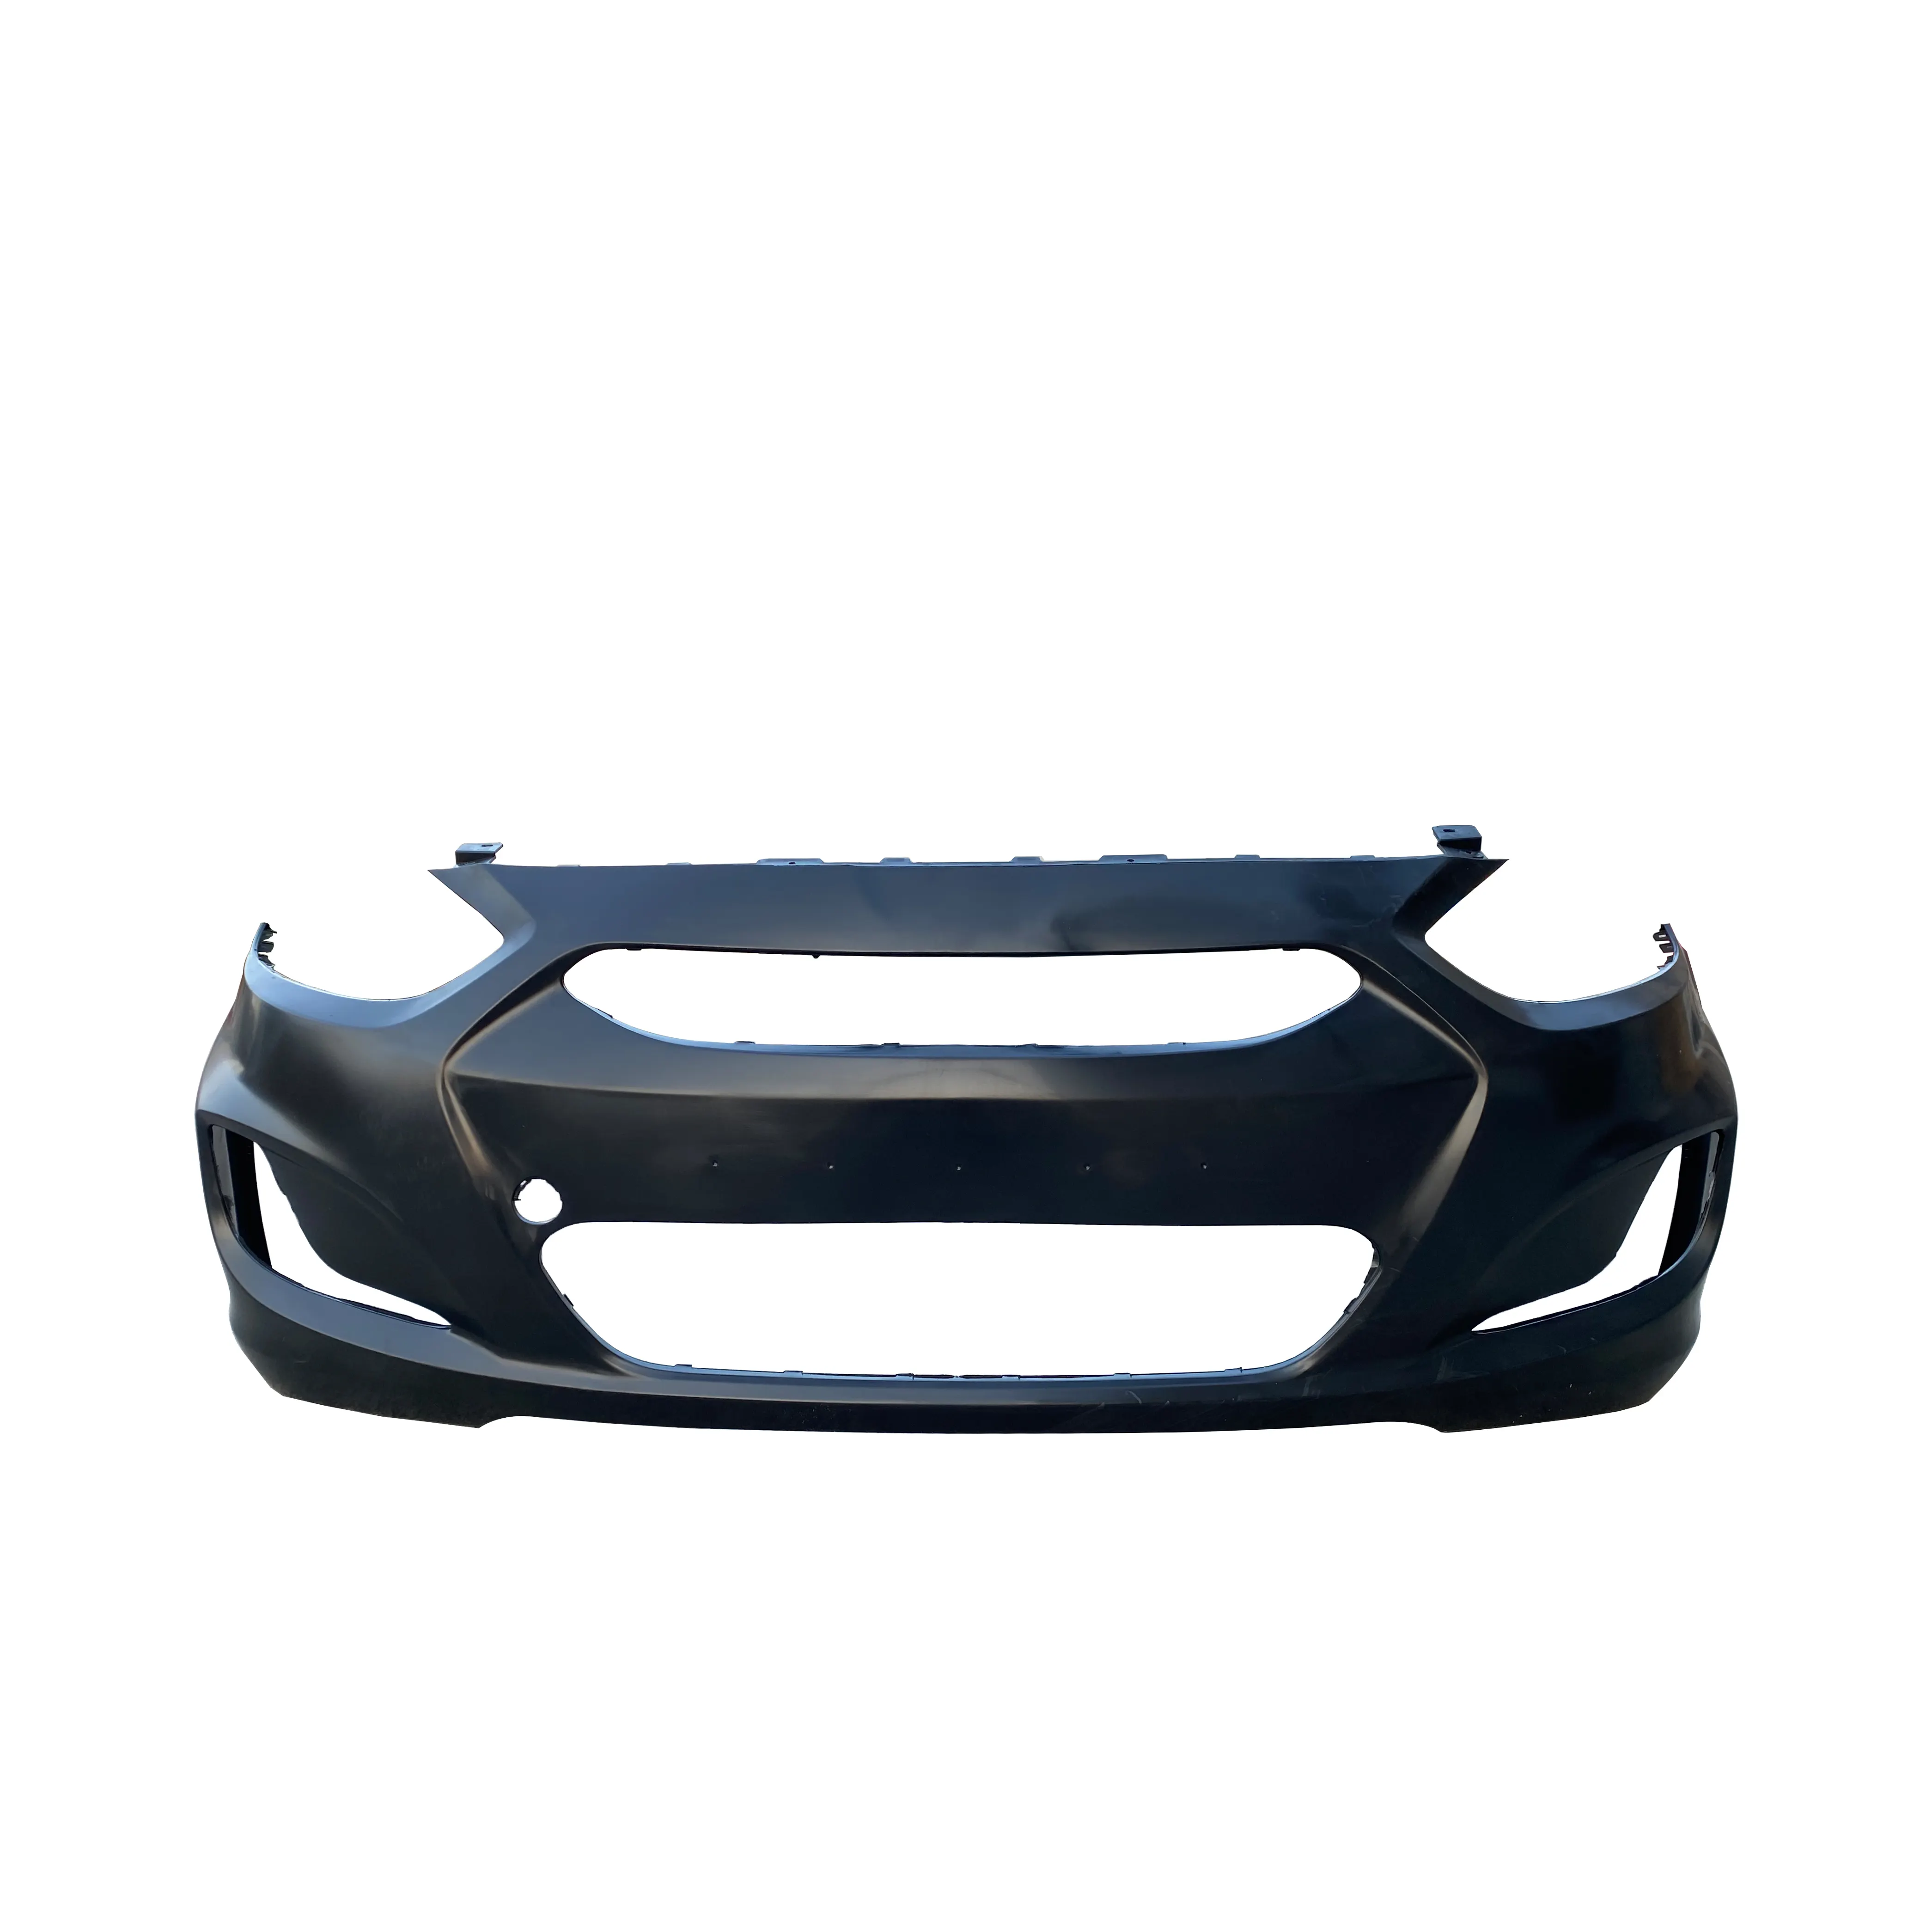 FRONT BUMPER FOR HYUNDAI ACCENT 2011 2012 2013 86511-1R000